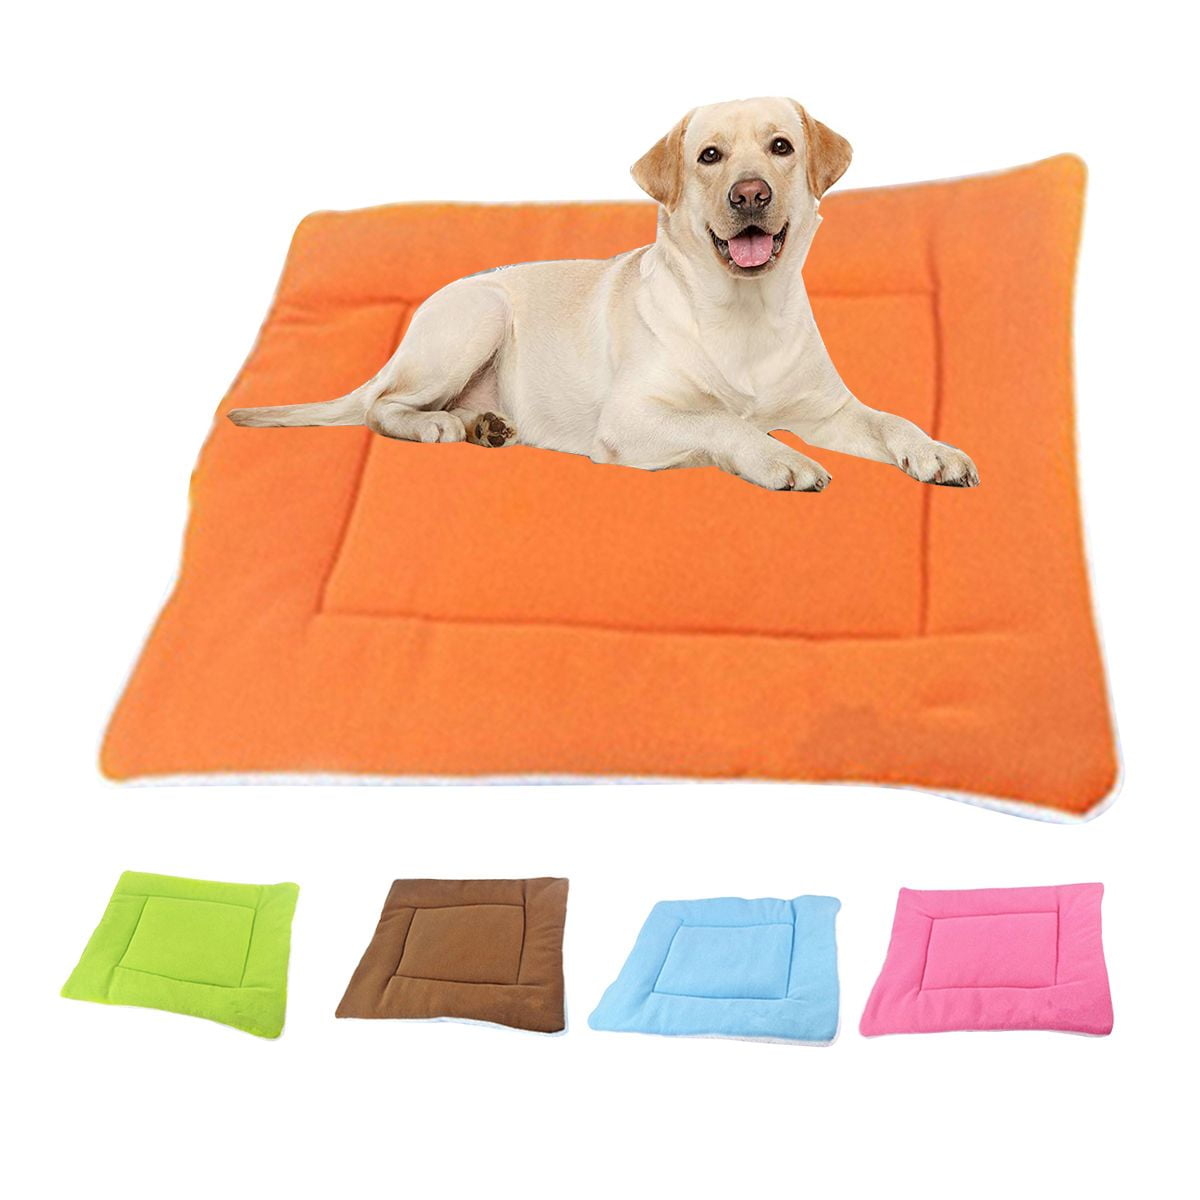 New Pet Dog Cat Soft Cushion Mat Pad for House Bed Kennel Cozy Warm Colorful 